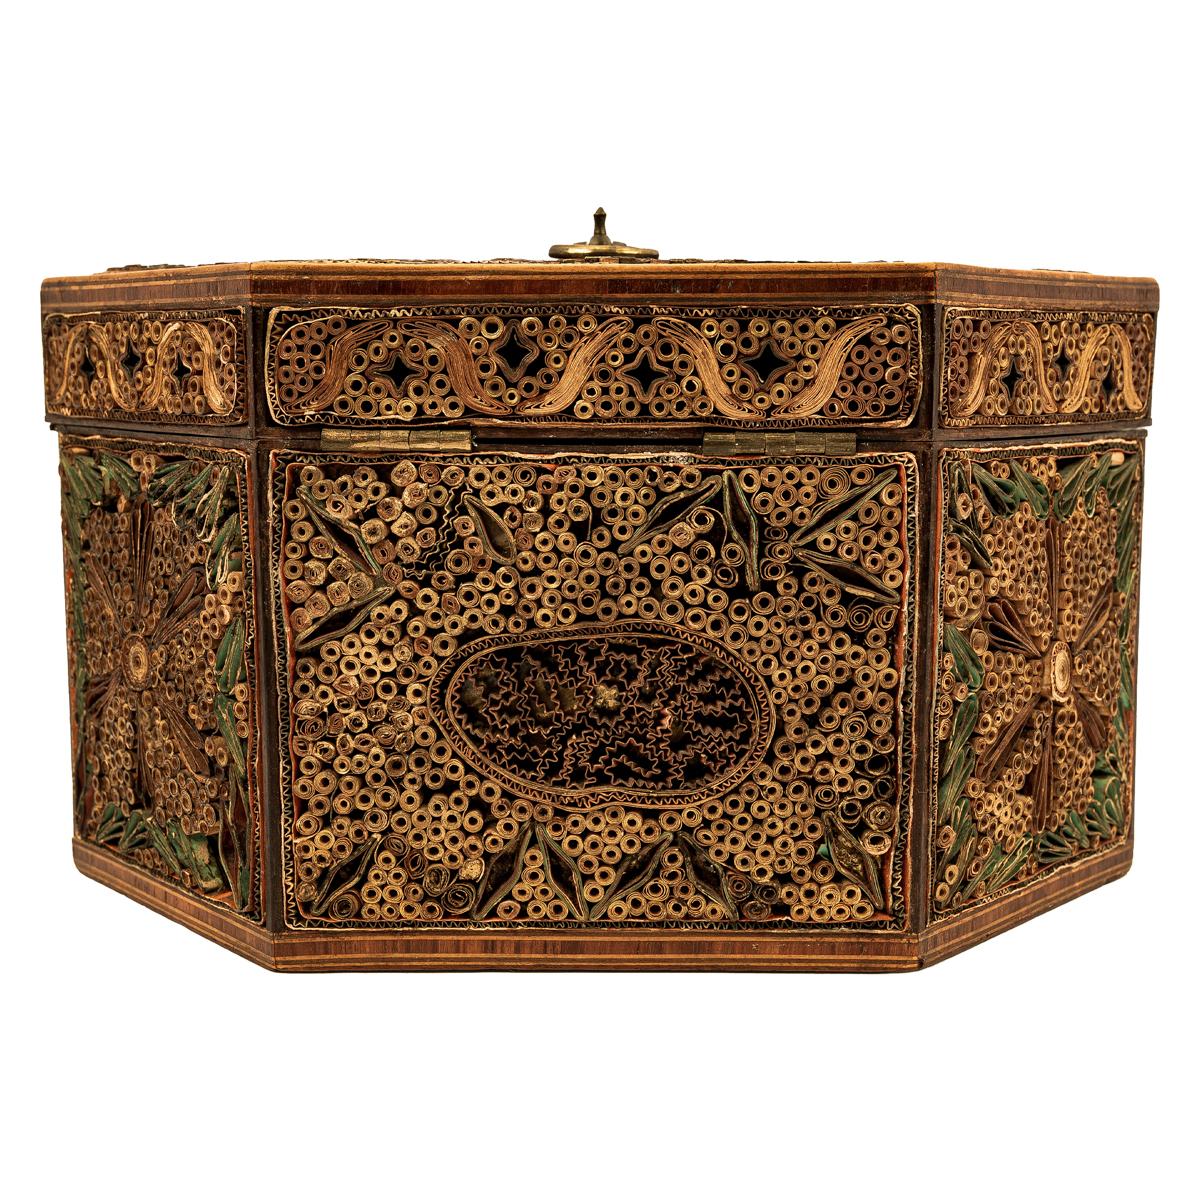 Late 18th Century Antique 18th Century Georgian Mahoghany Paper Scroll Work Tea Caddy Box 1780 For Sale